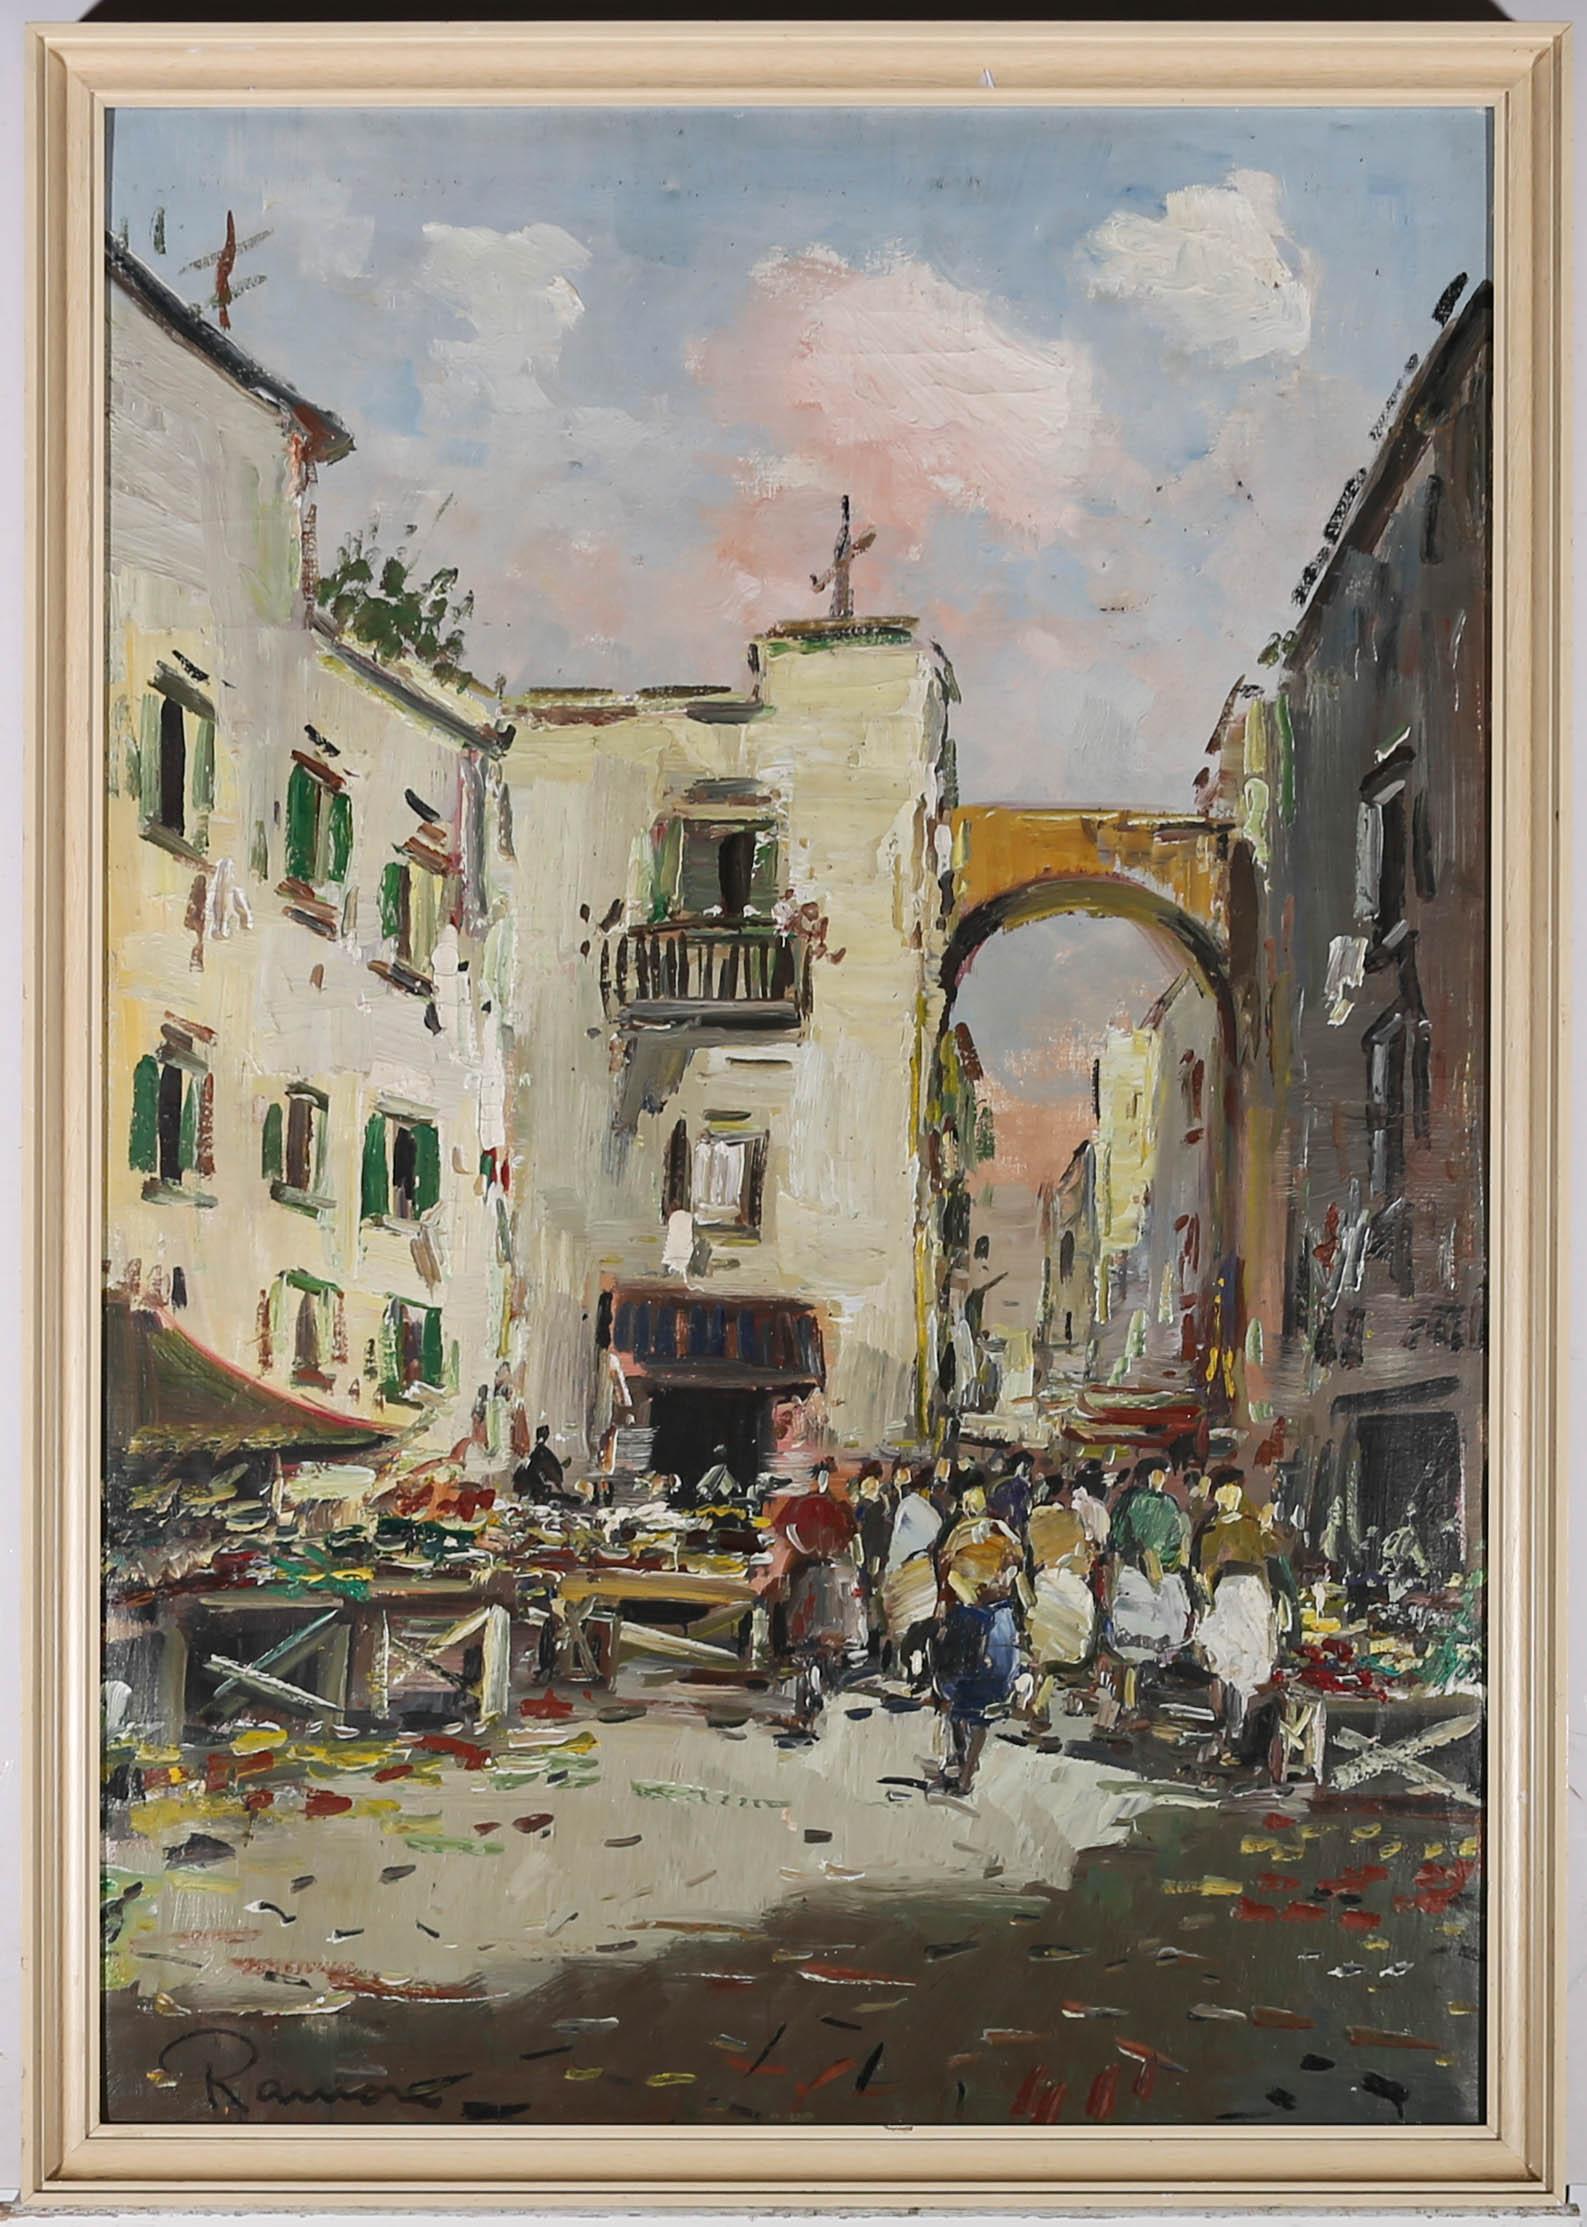 A bustling continental market scene in oil by the artist Ramon. Impressionistic blocks of colour capture the atmosphere of the day. Overflowing market stall arrangements and architectural elements have been painted with impasto details. People can